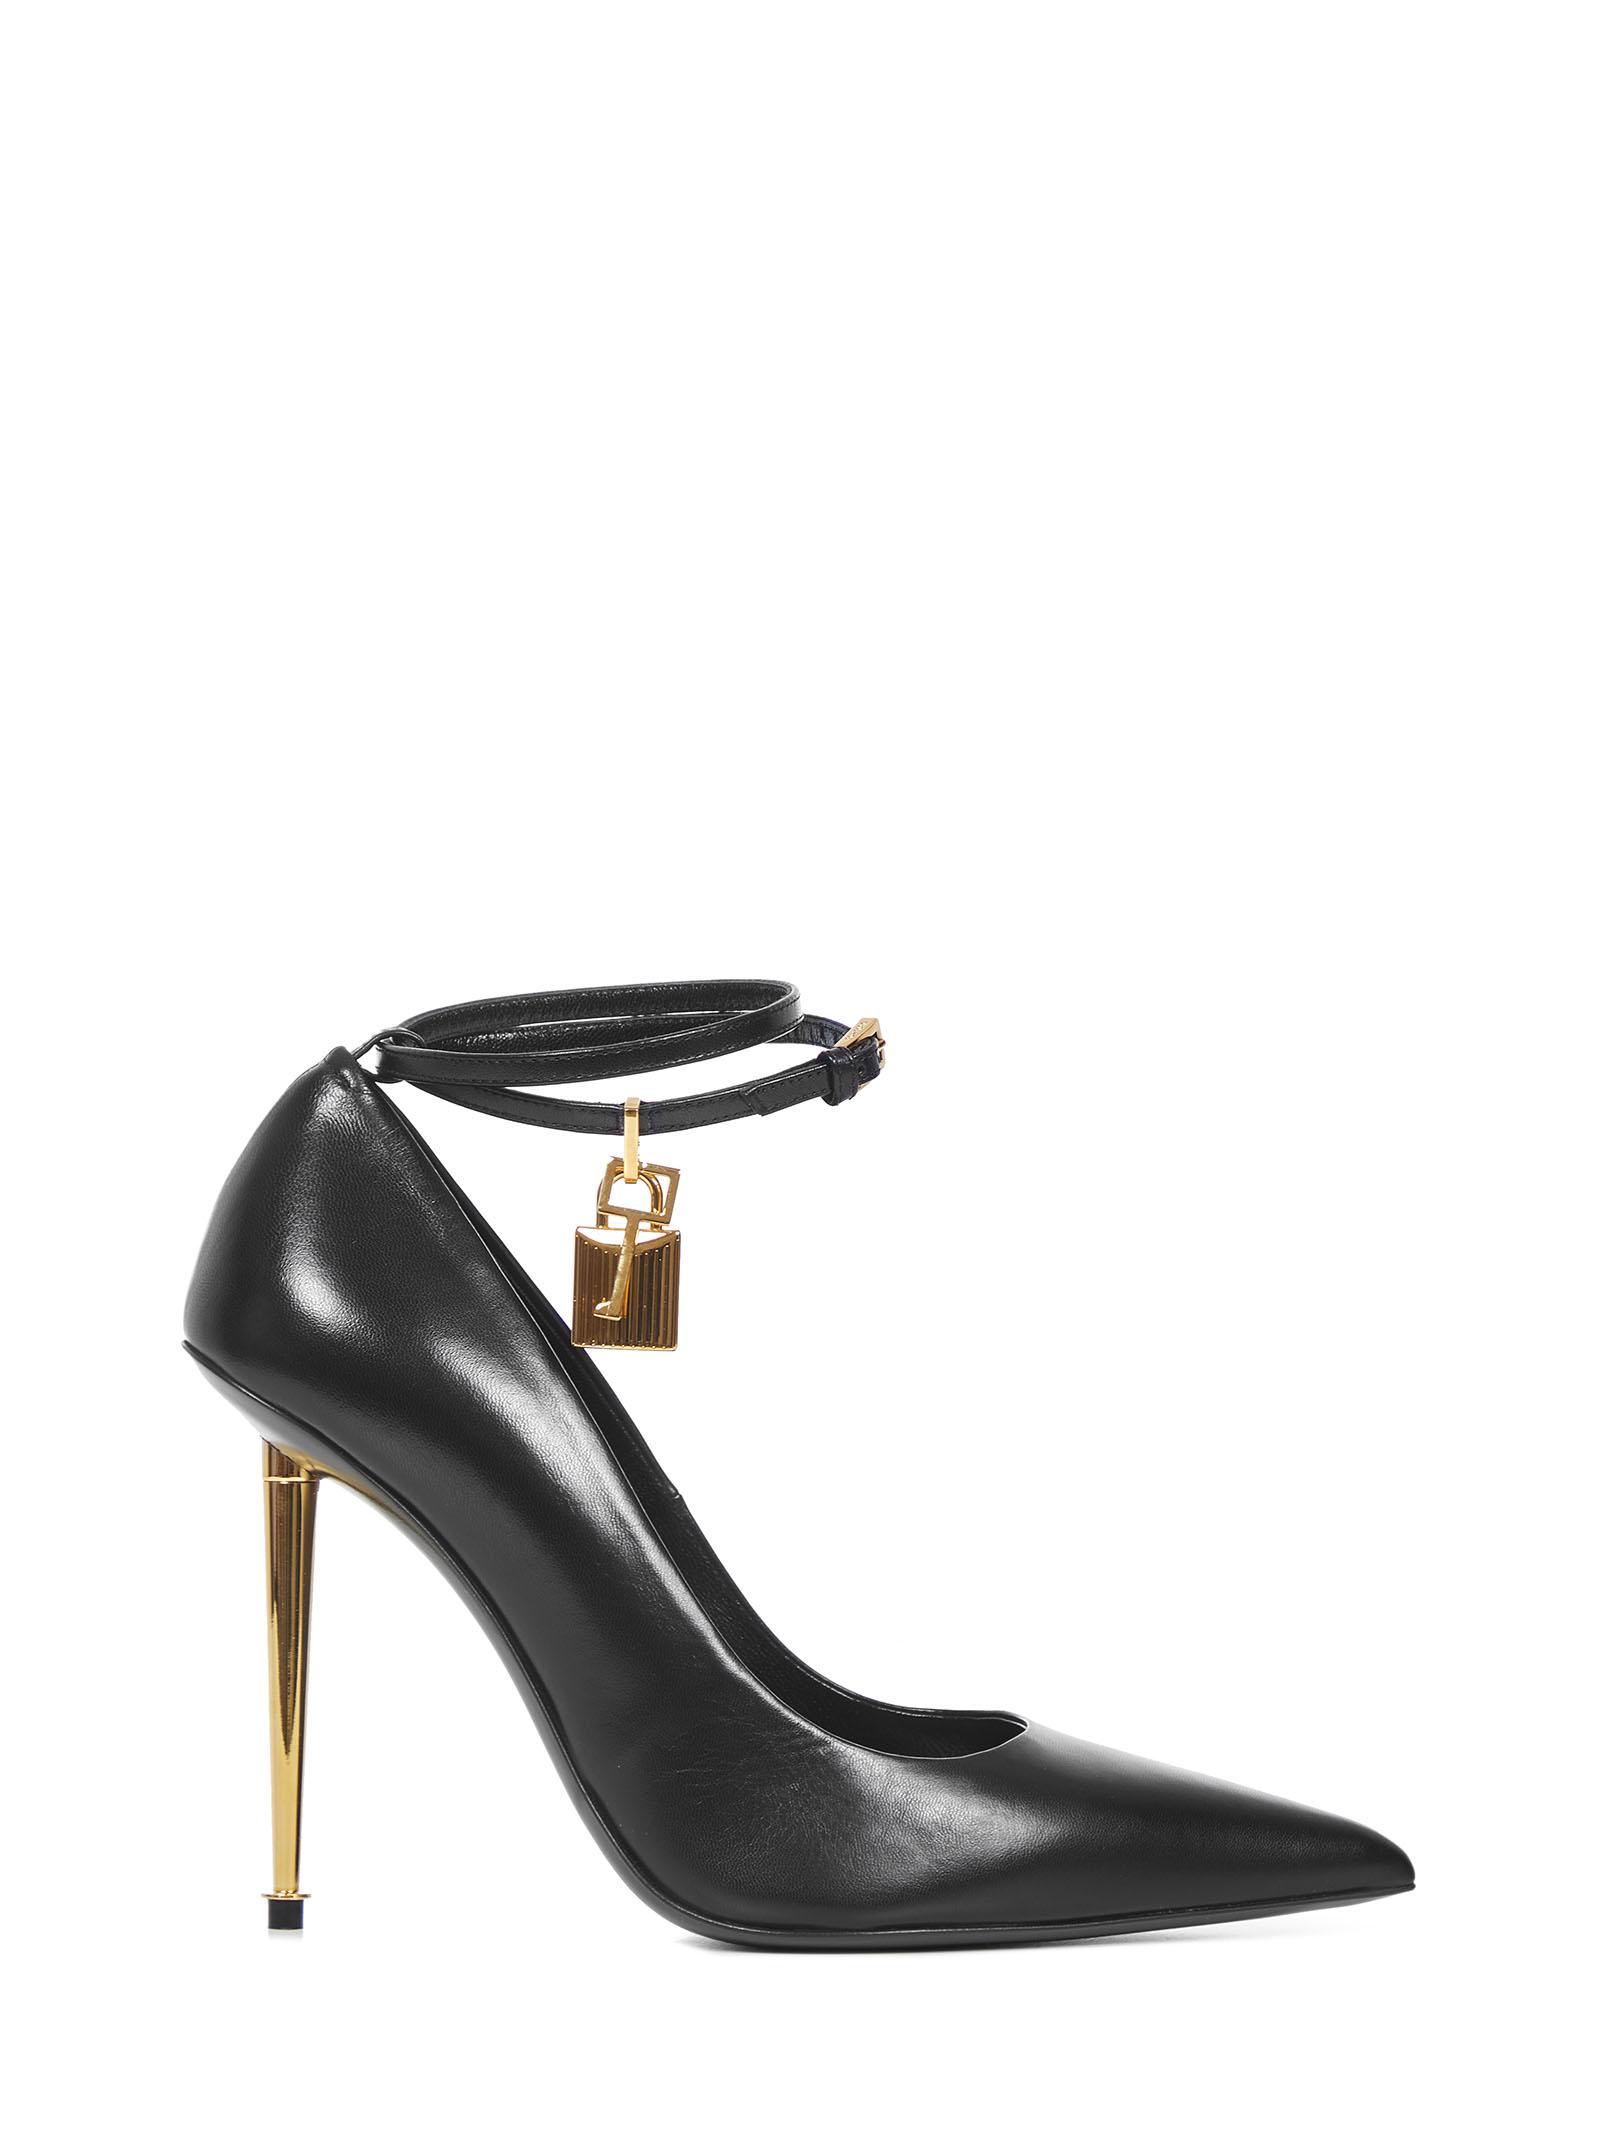 Tom Ford Leather Padlock Pumps in Black - Lyst